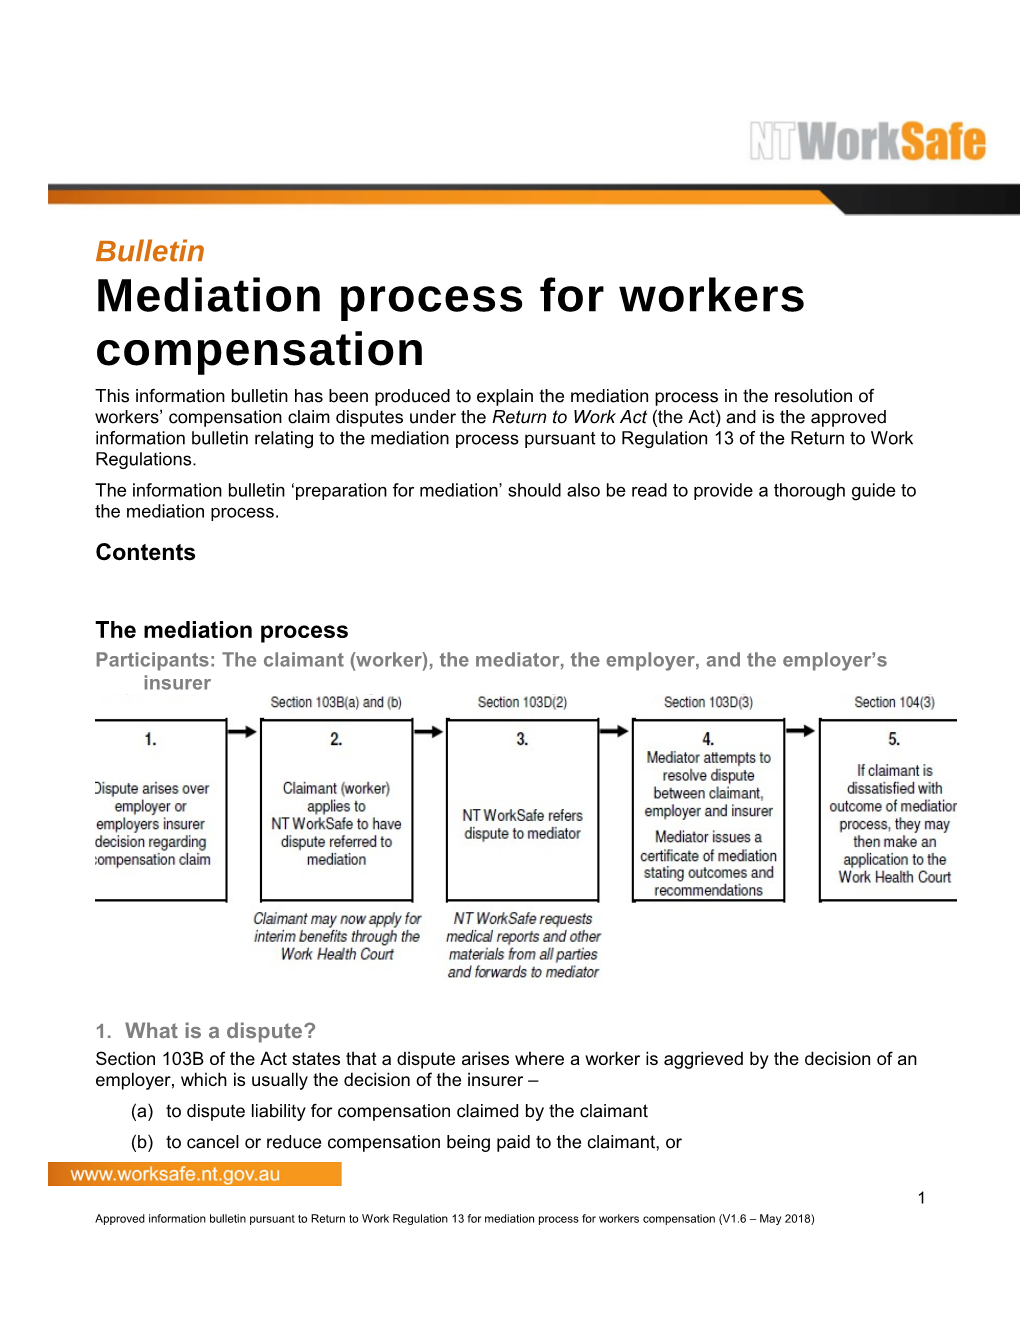 Mediation Process for Workers Compensation